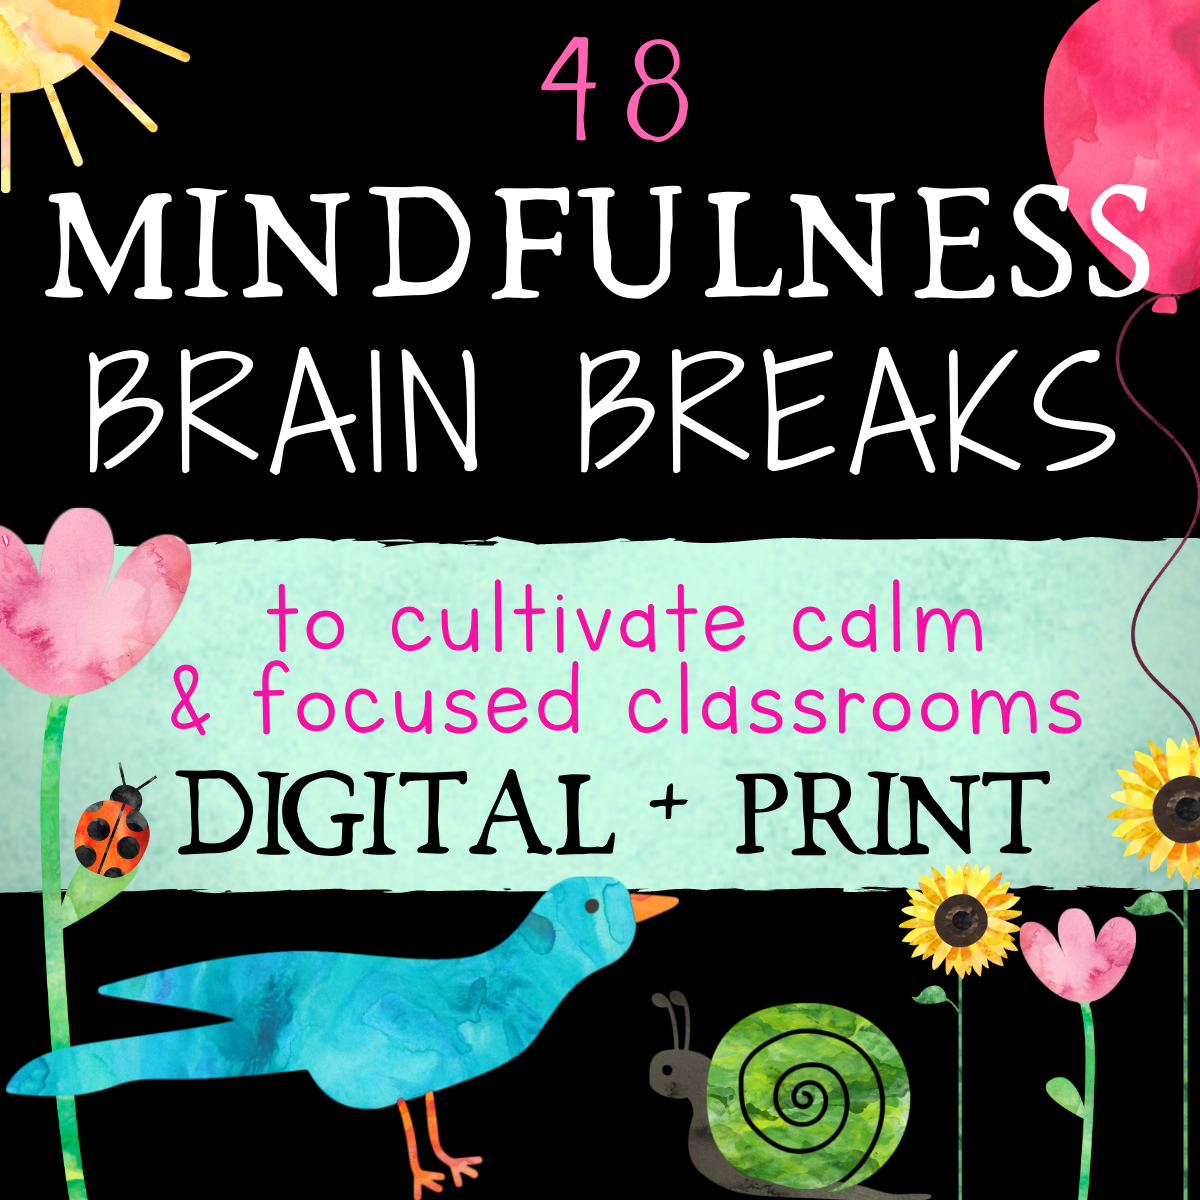 Mindfulness Brain Breaks Coping Skills for Classroom Management